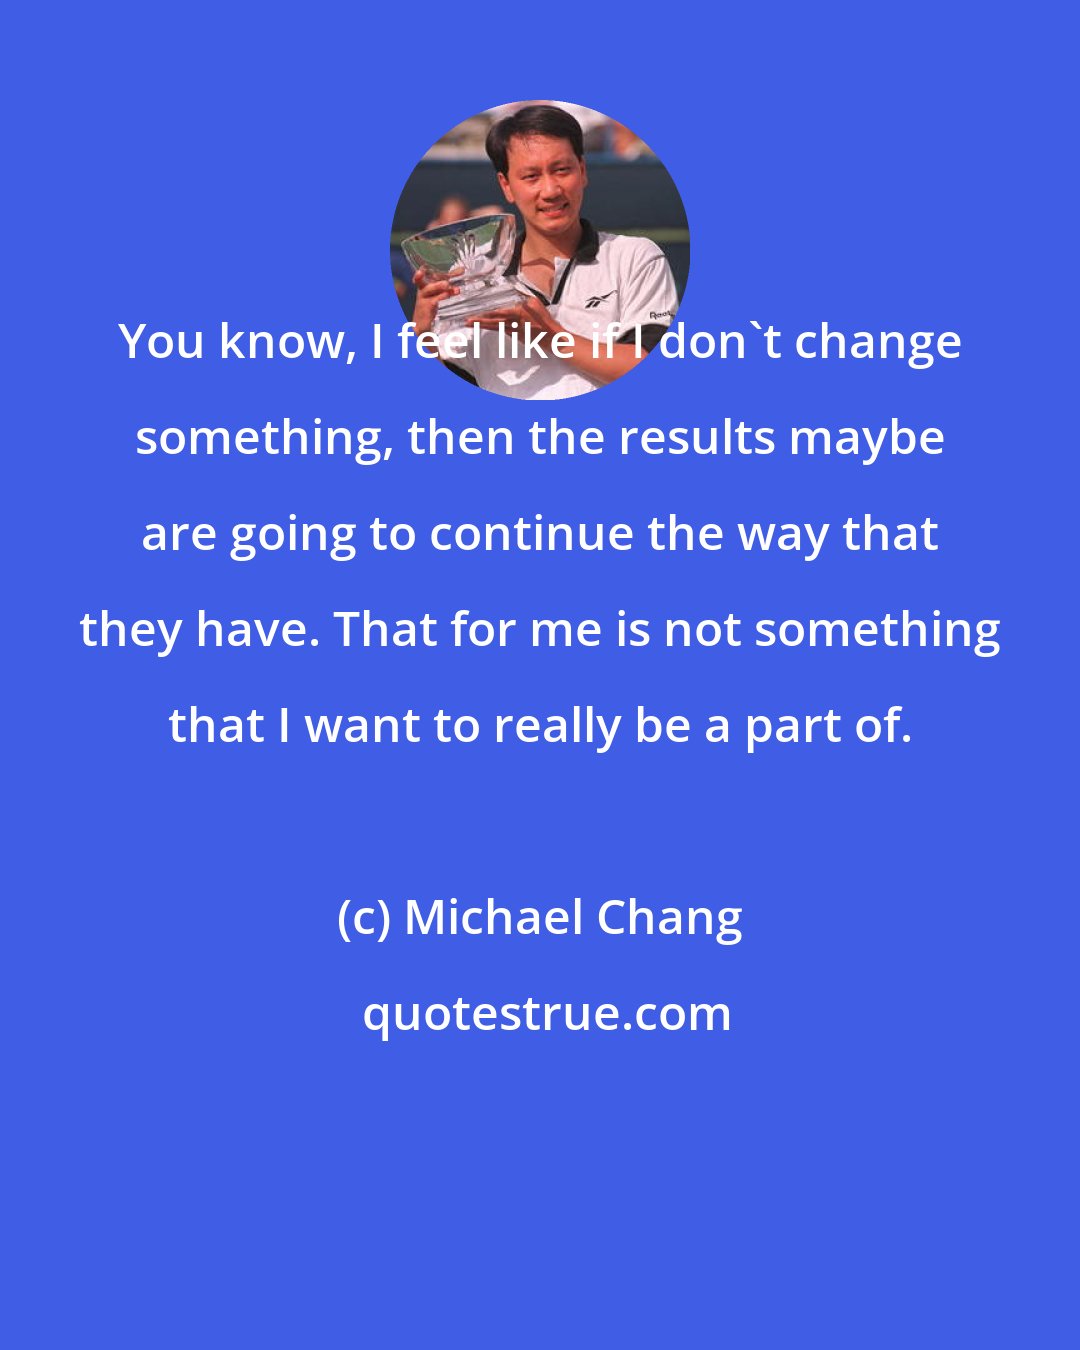 Michael Chang: You know, I feel like if I don't change something, then the results maybe are going to continue the way that they have. That for me is not something that I want to really be a part of.